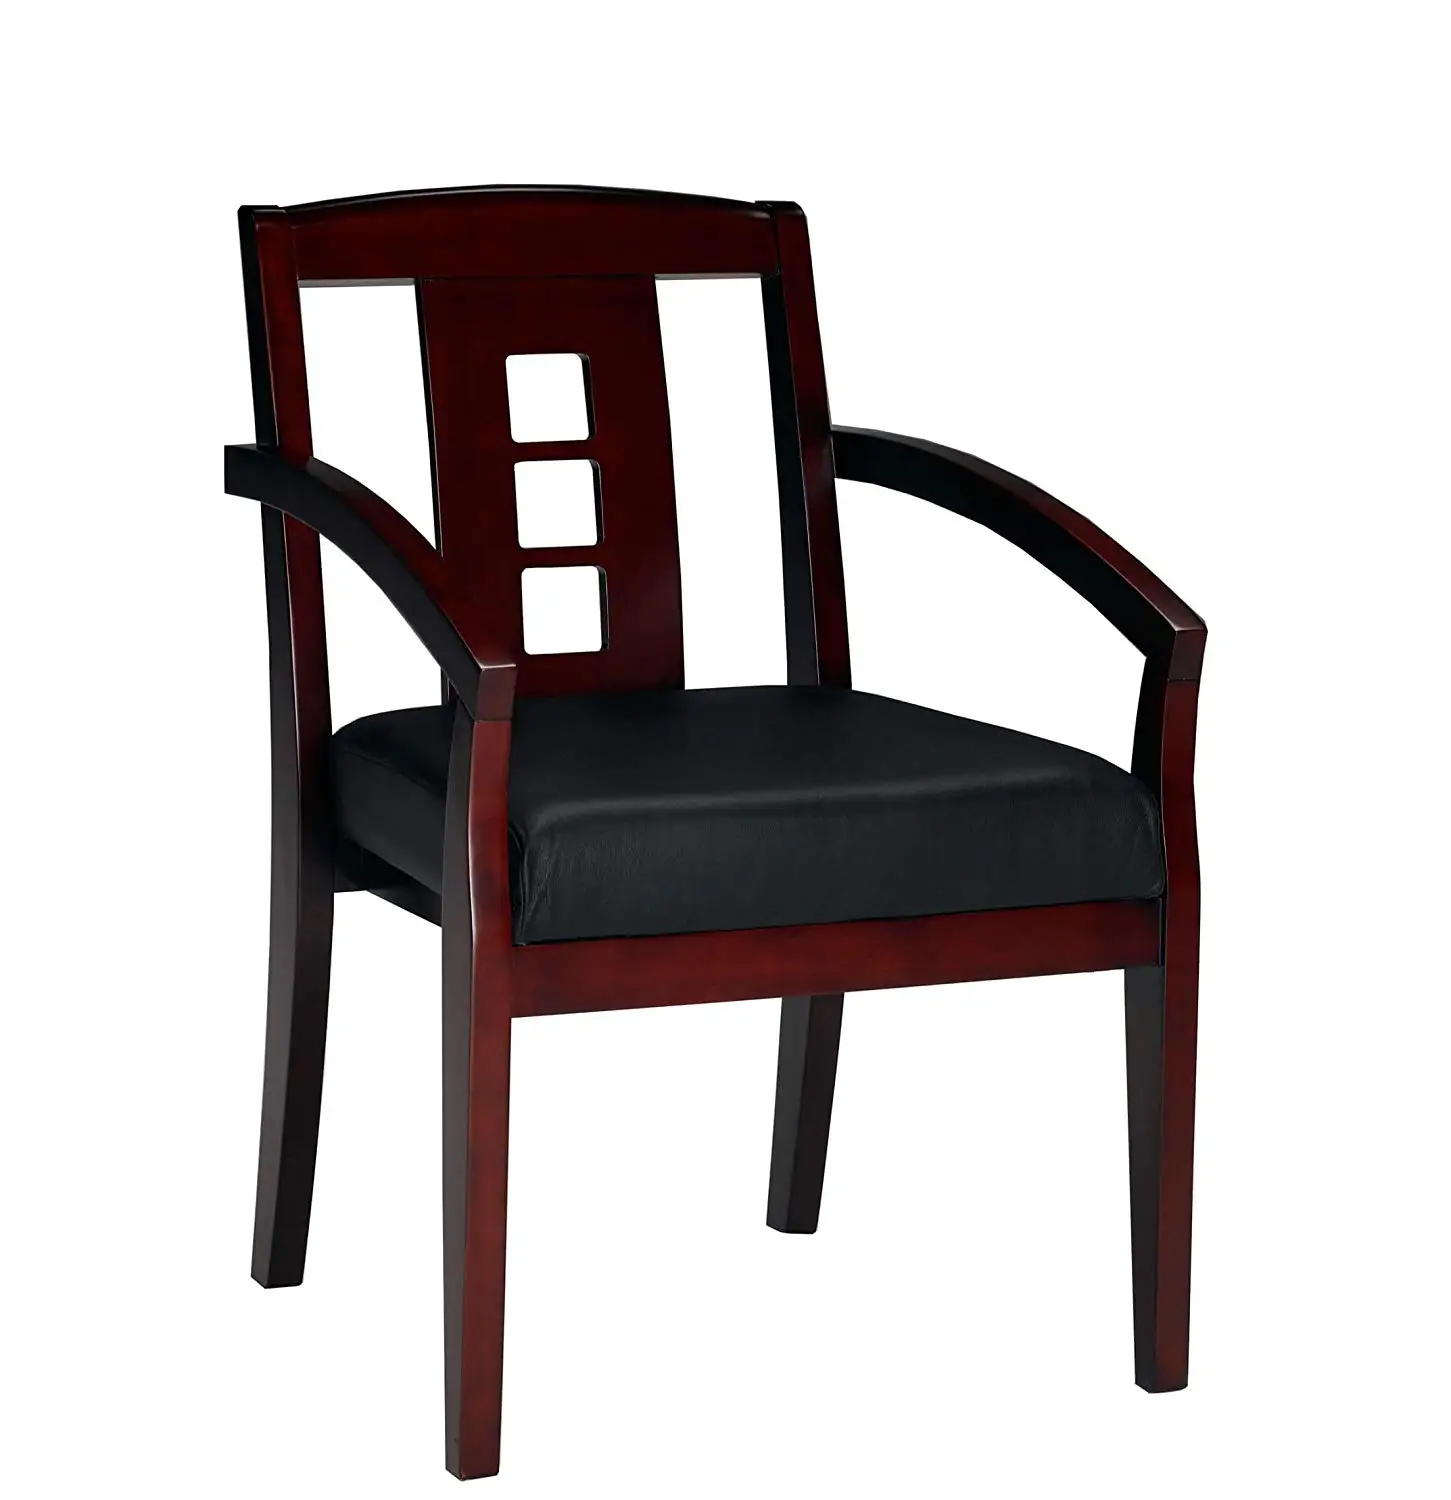 Cheap Office Sitting Chairs, find Office Sitting Chairs deals on line